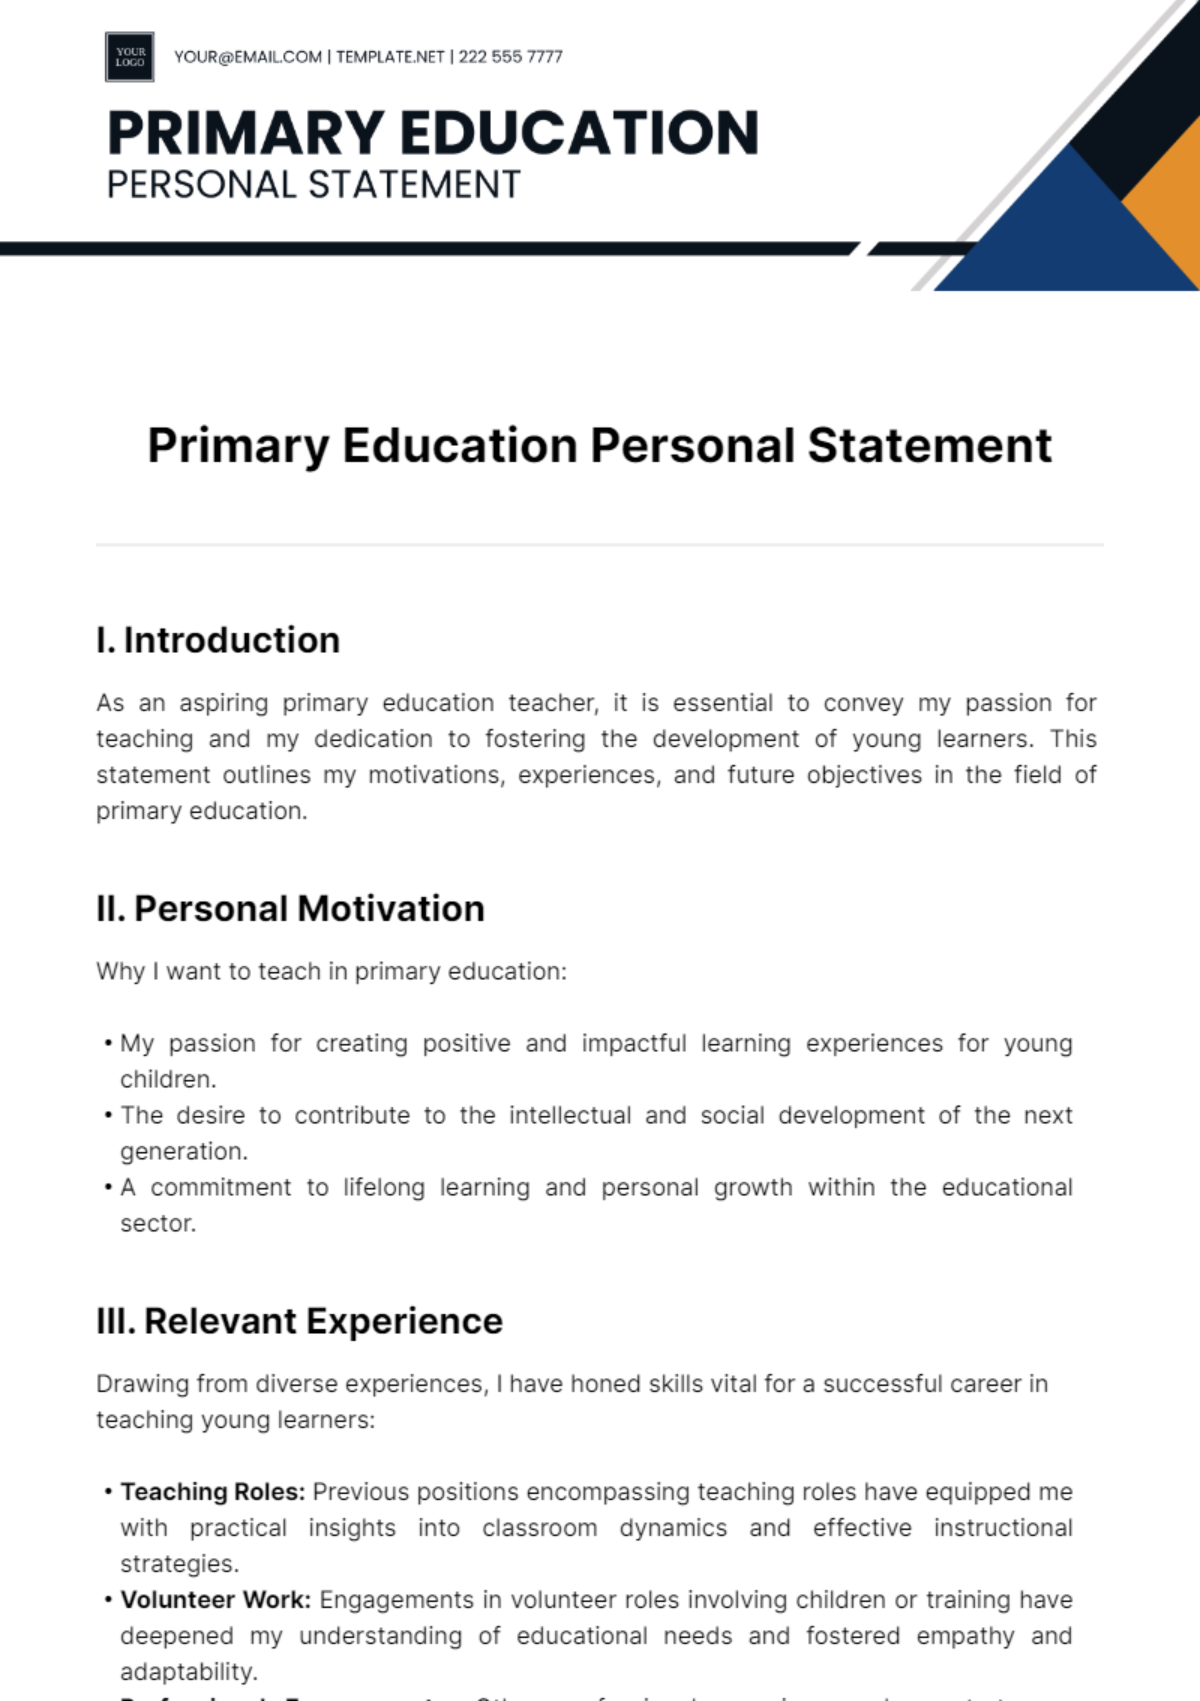 Primary Education Personal Statement Template